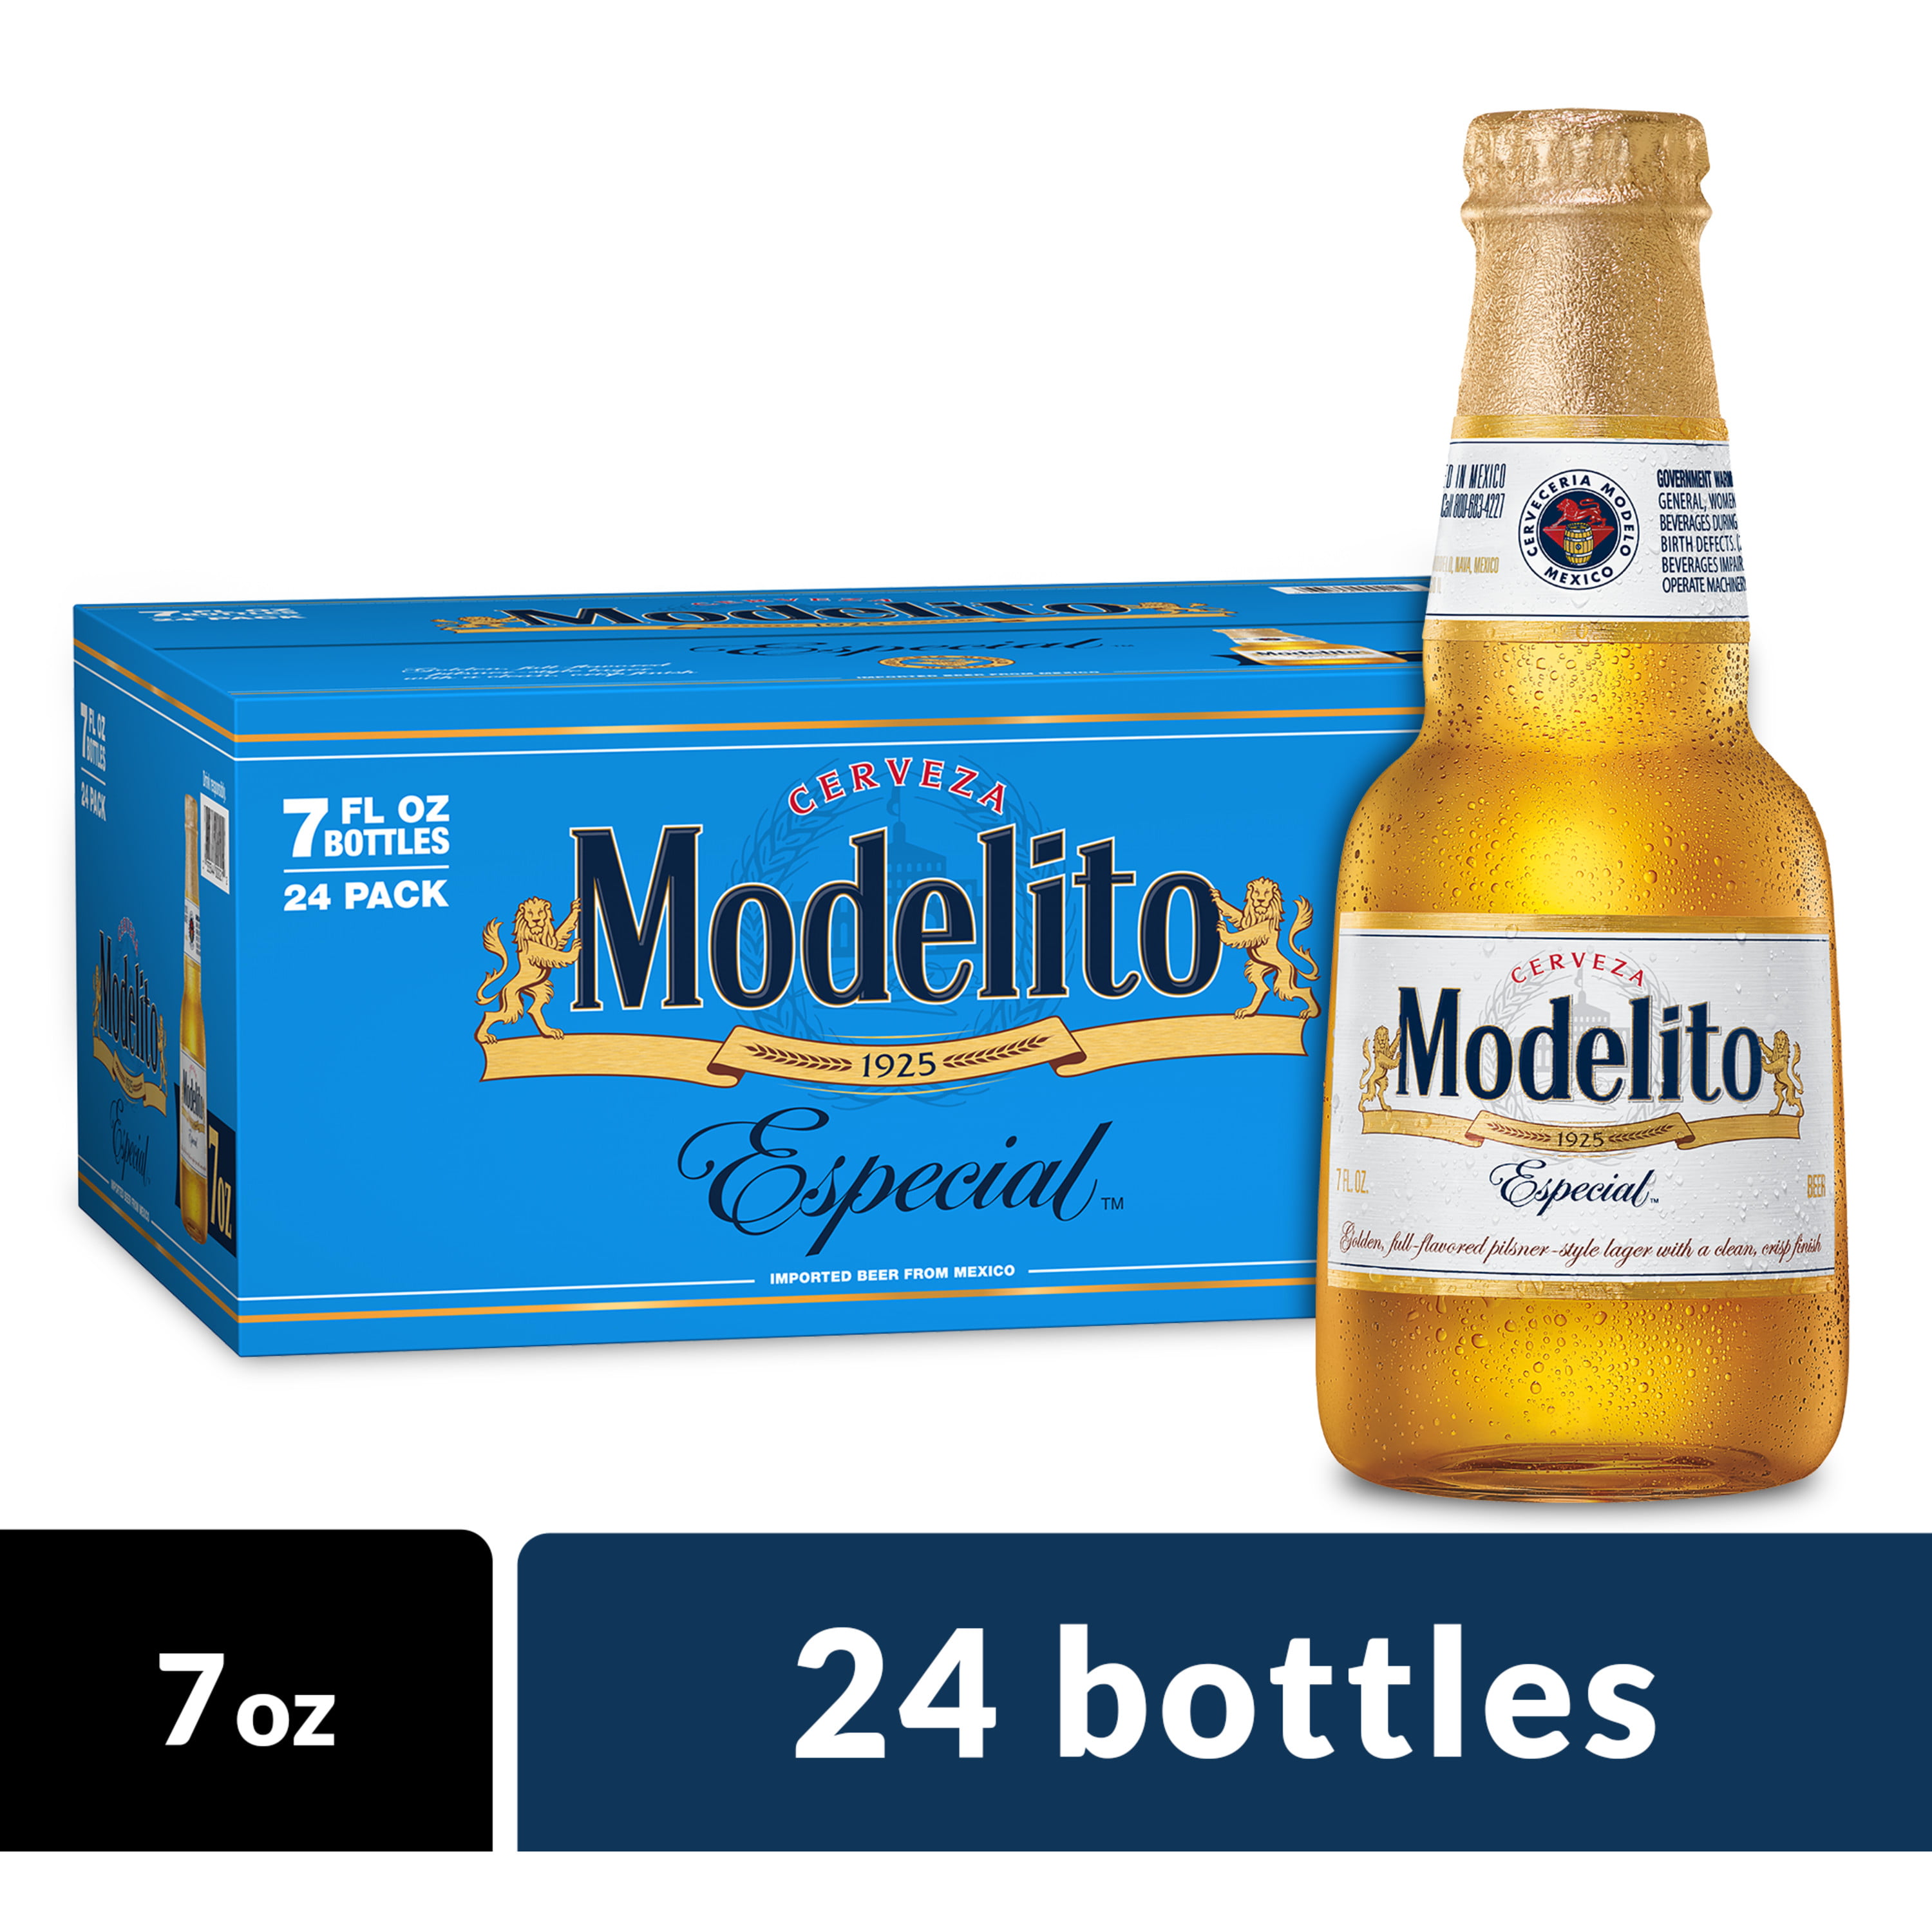 How much is a 24 pack of modelo at costco Modelo Especial Modelito Mexican Lager Beer 24 Pk 7 Fl Oz Bottles 4 4 Abv Walmart Com Walmart Com